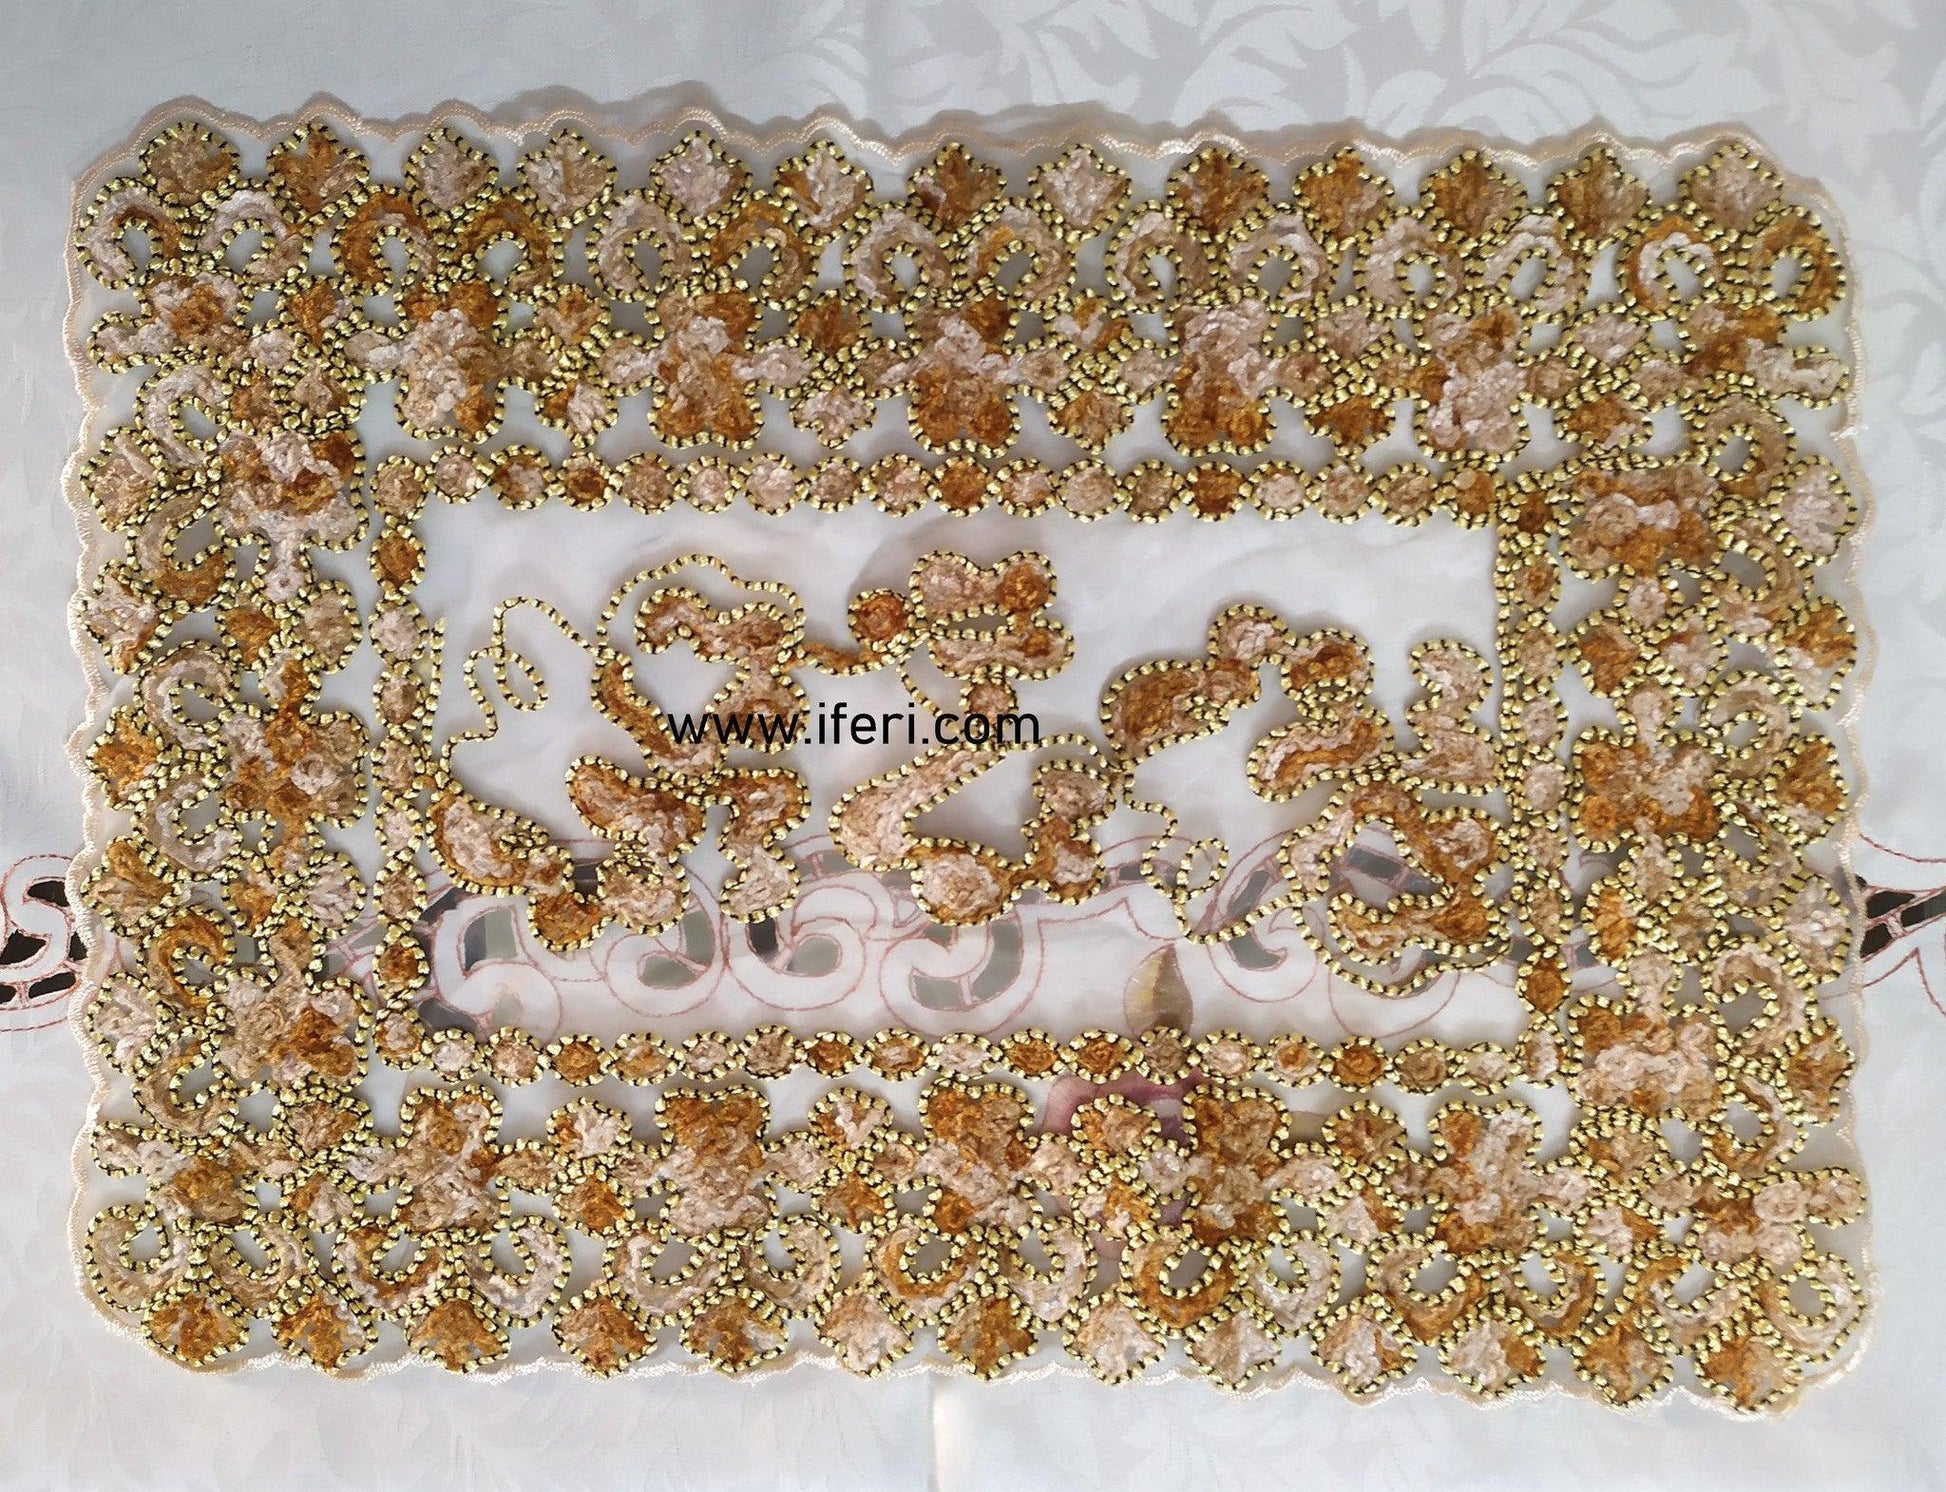 7 Pcs Embroidered Table Mat with Runner RJ1324 Price in Bangladesh - iferi.com